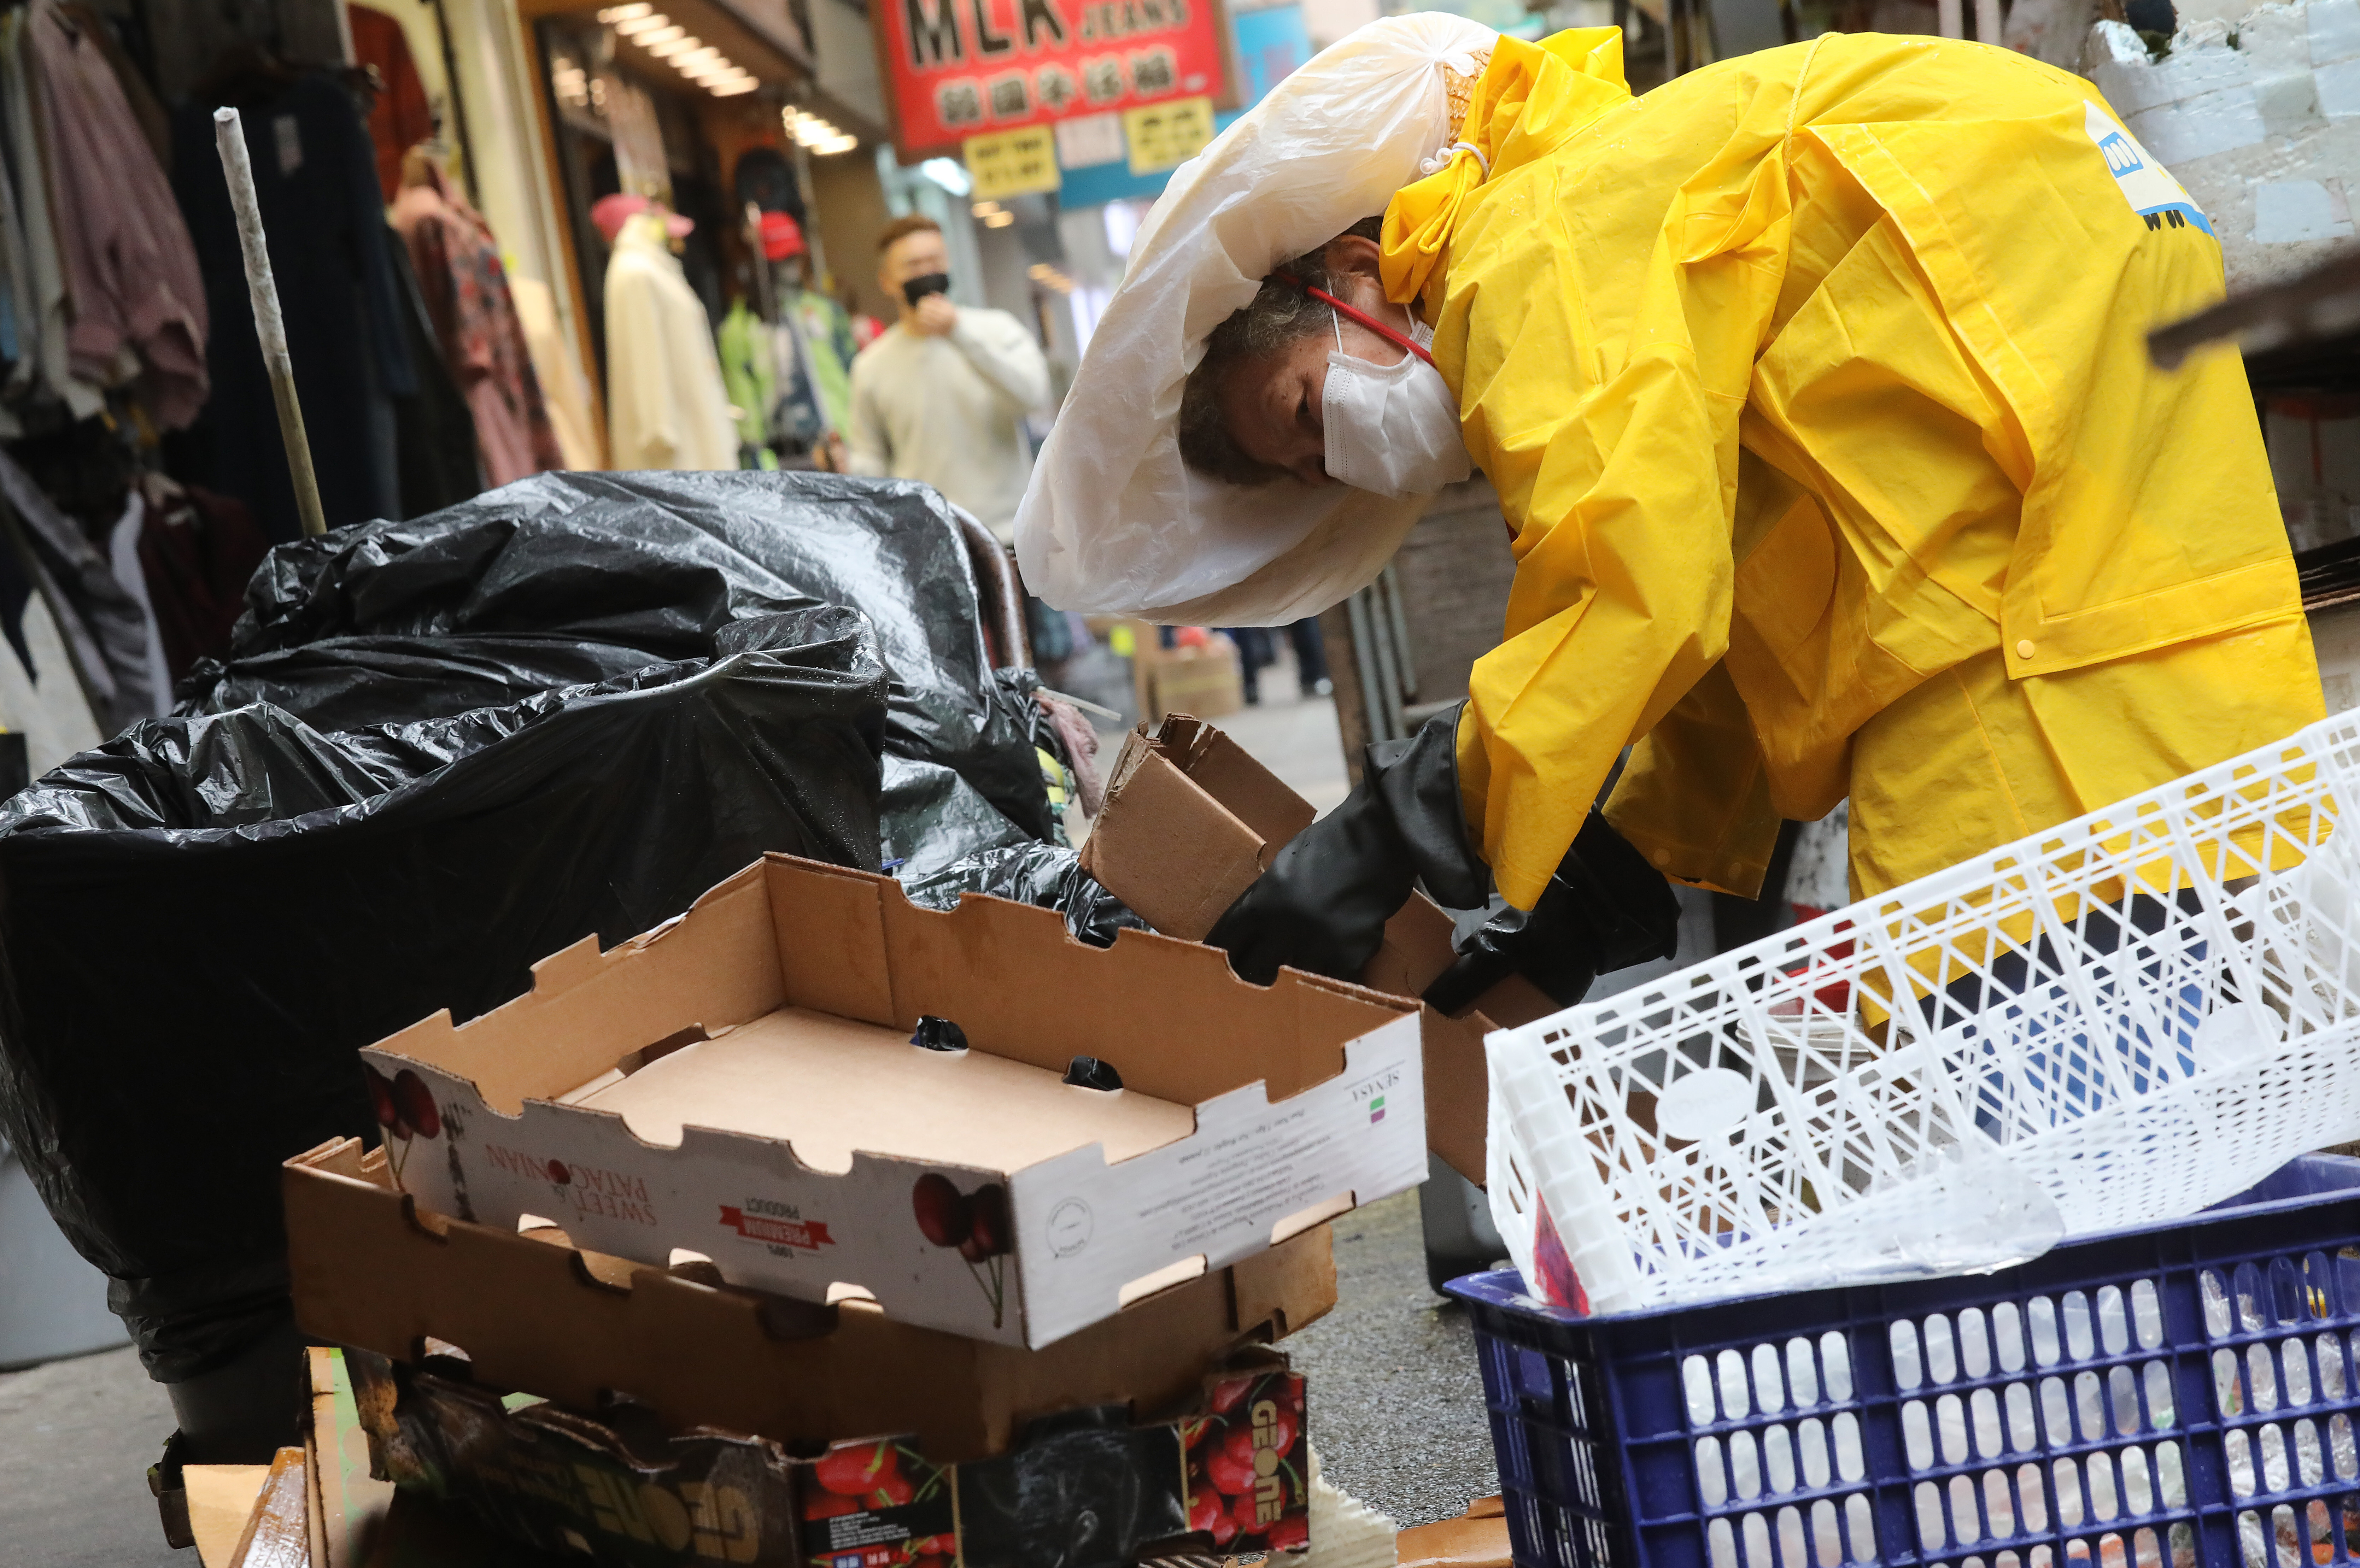 A woman collects cardboard in Mong Kok on February 13, 2020. The city’s poor deserve better than “loyal rubbish”. Photo: K.Y. Cheng